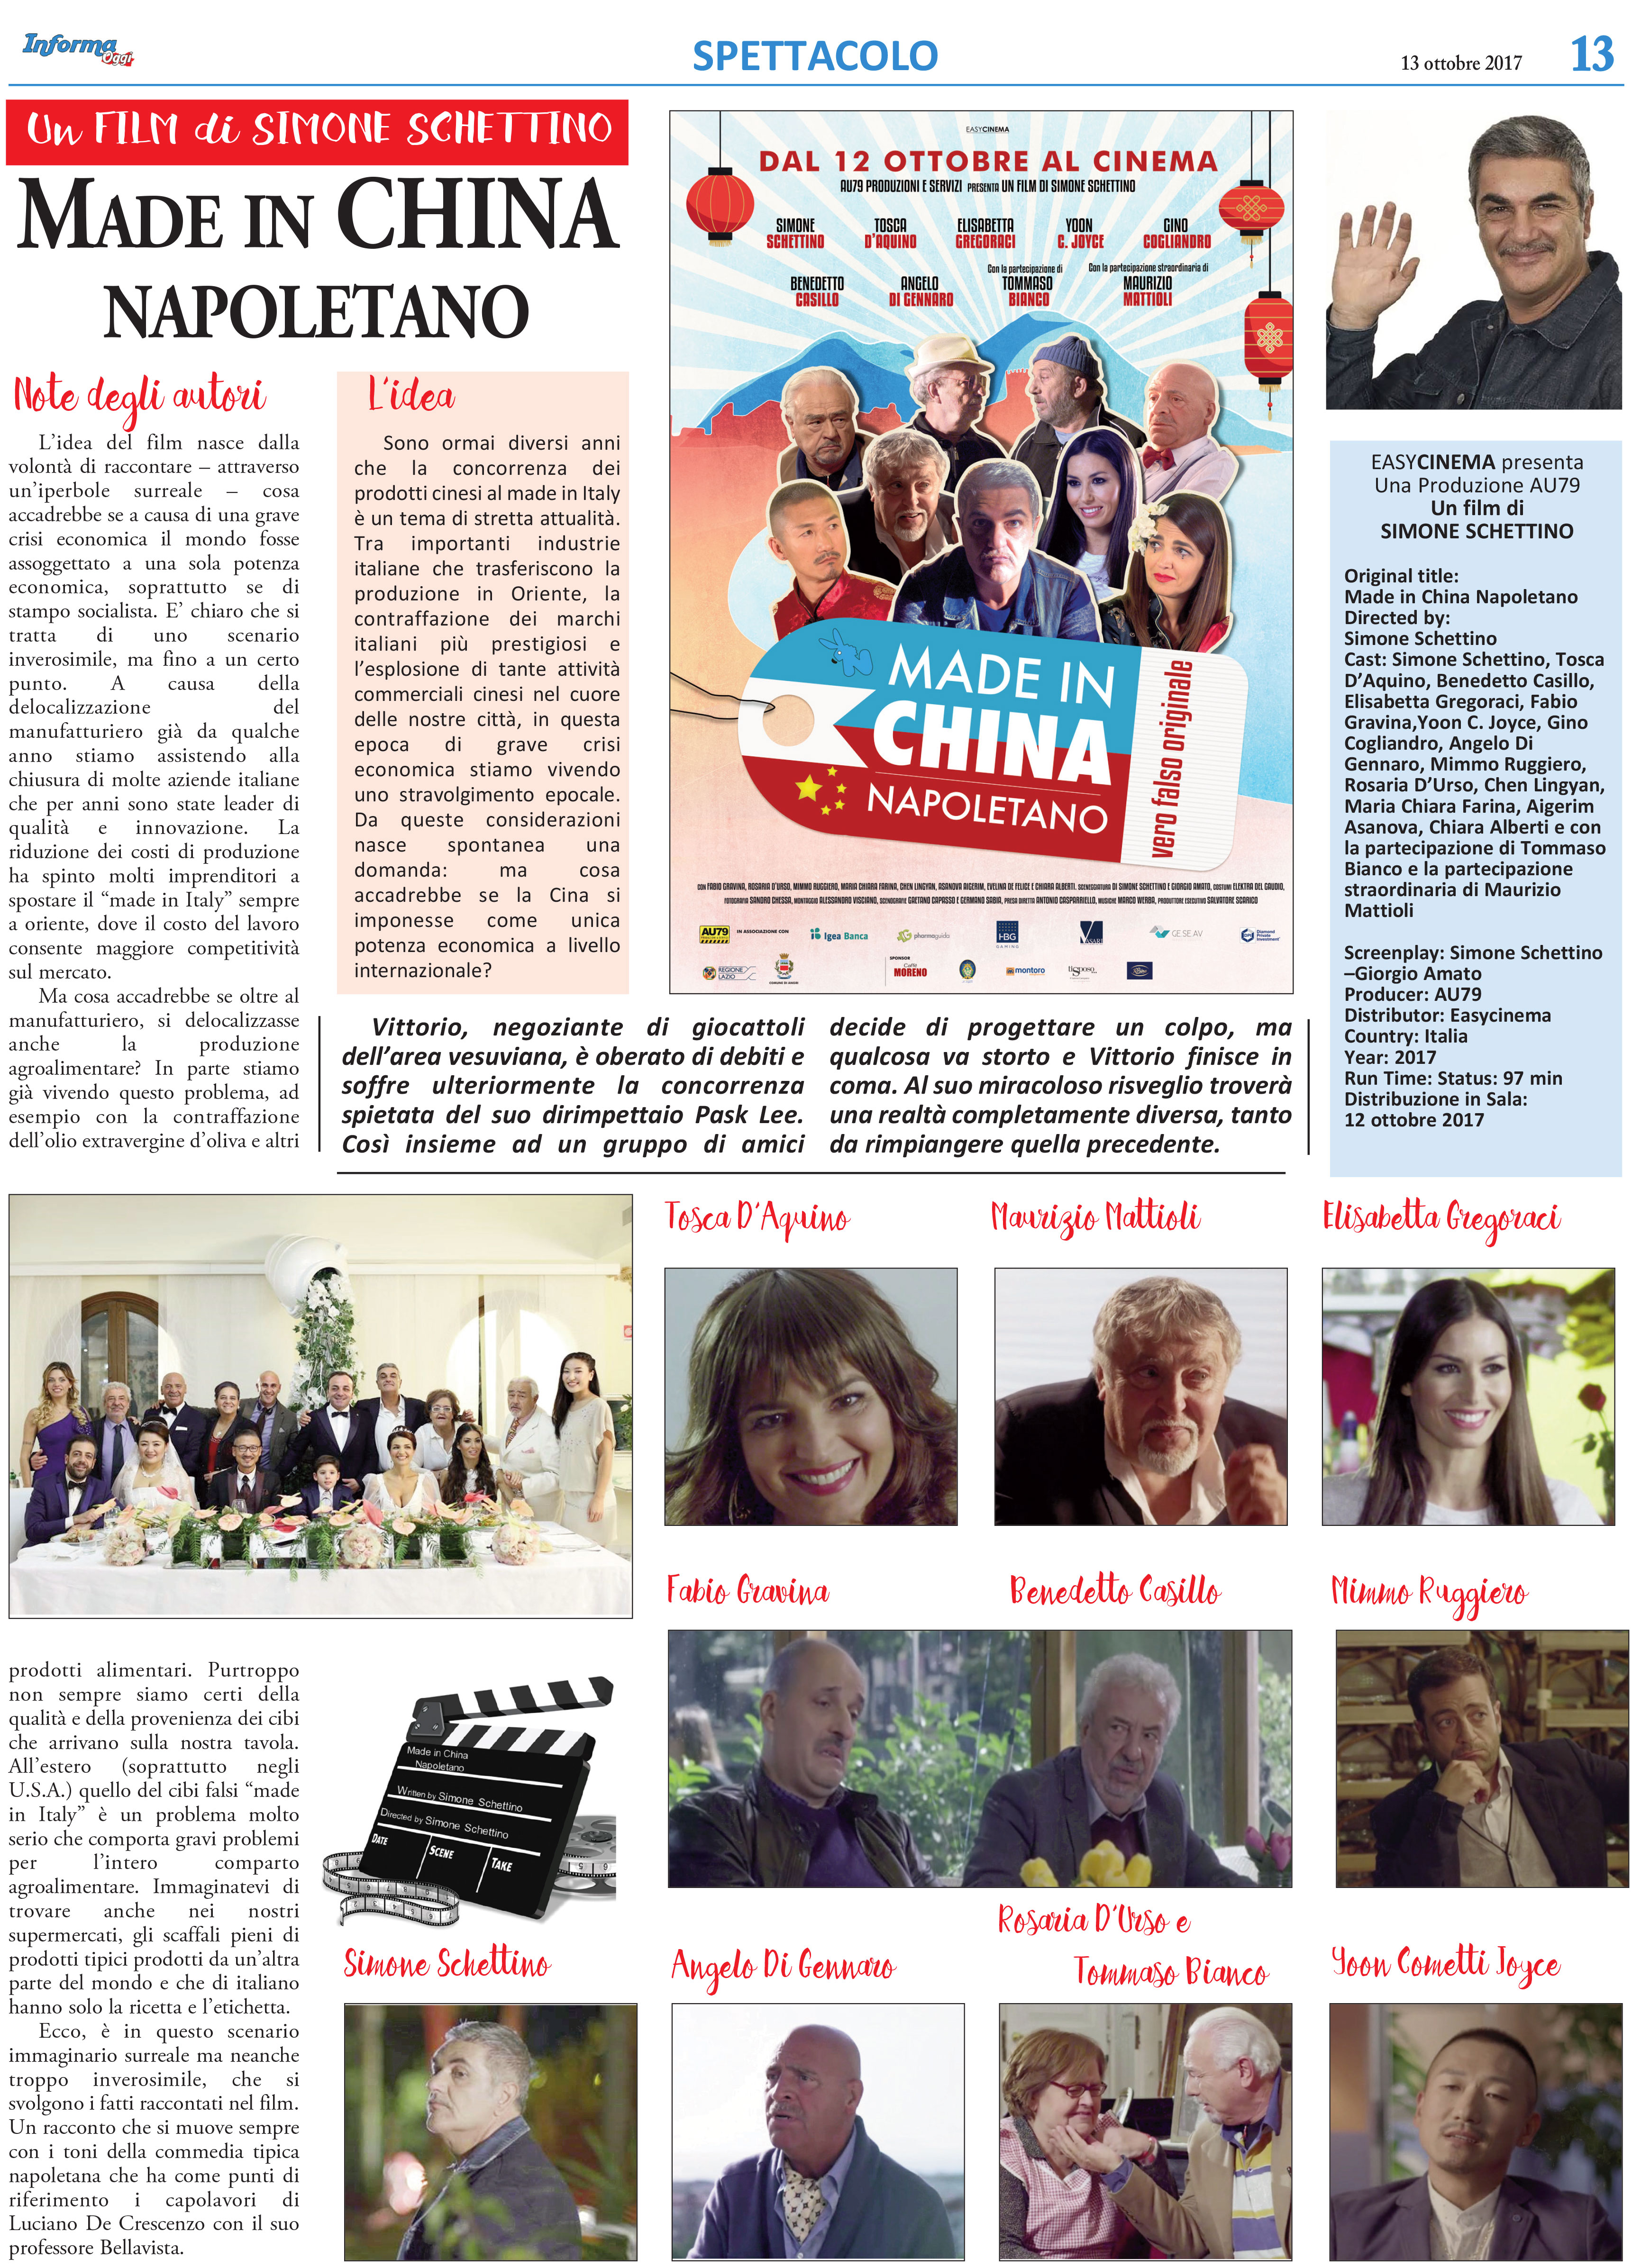 made-in-china-news